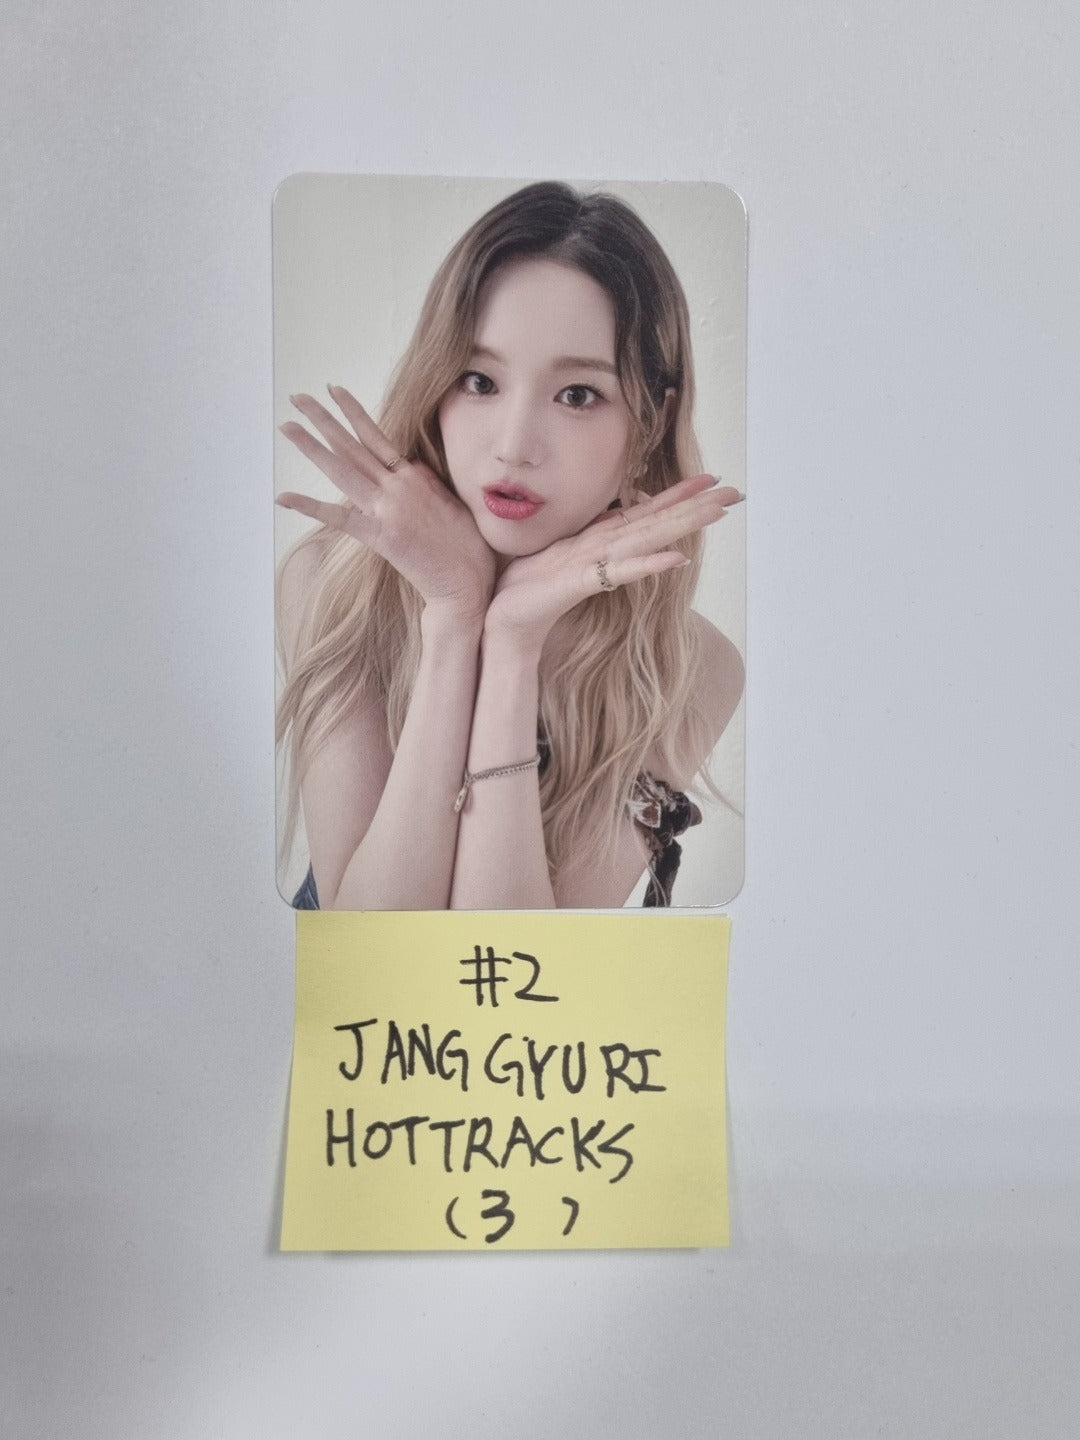 Fromis_9 "9 Way Ticket" -Hottracks Fan Sign Event Photocard